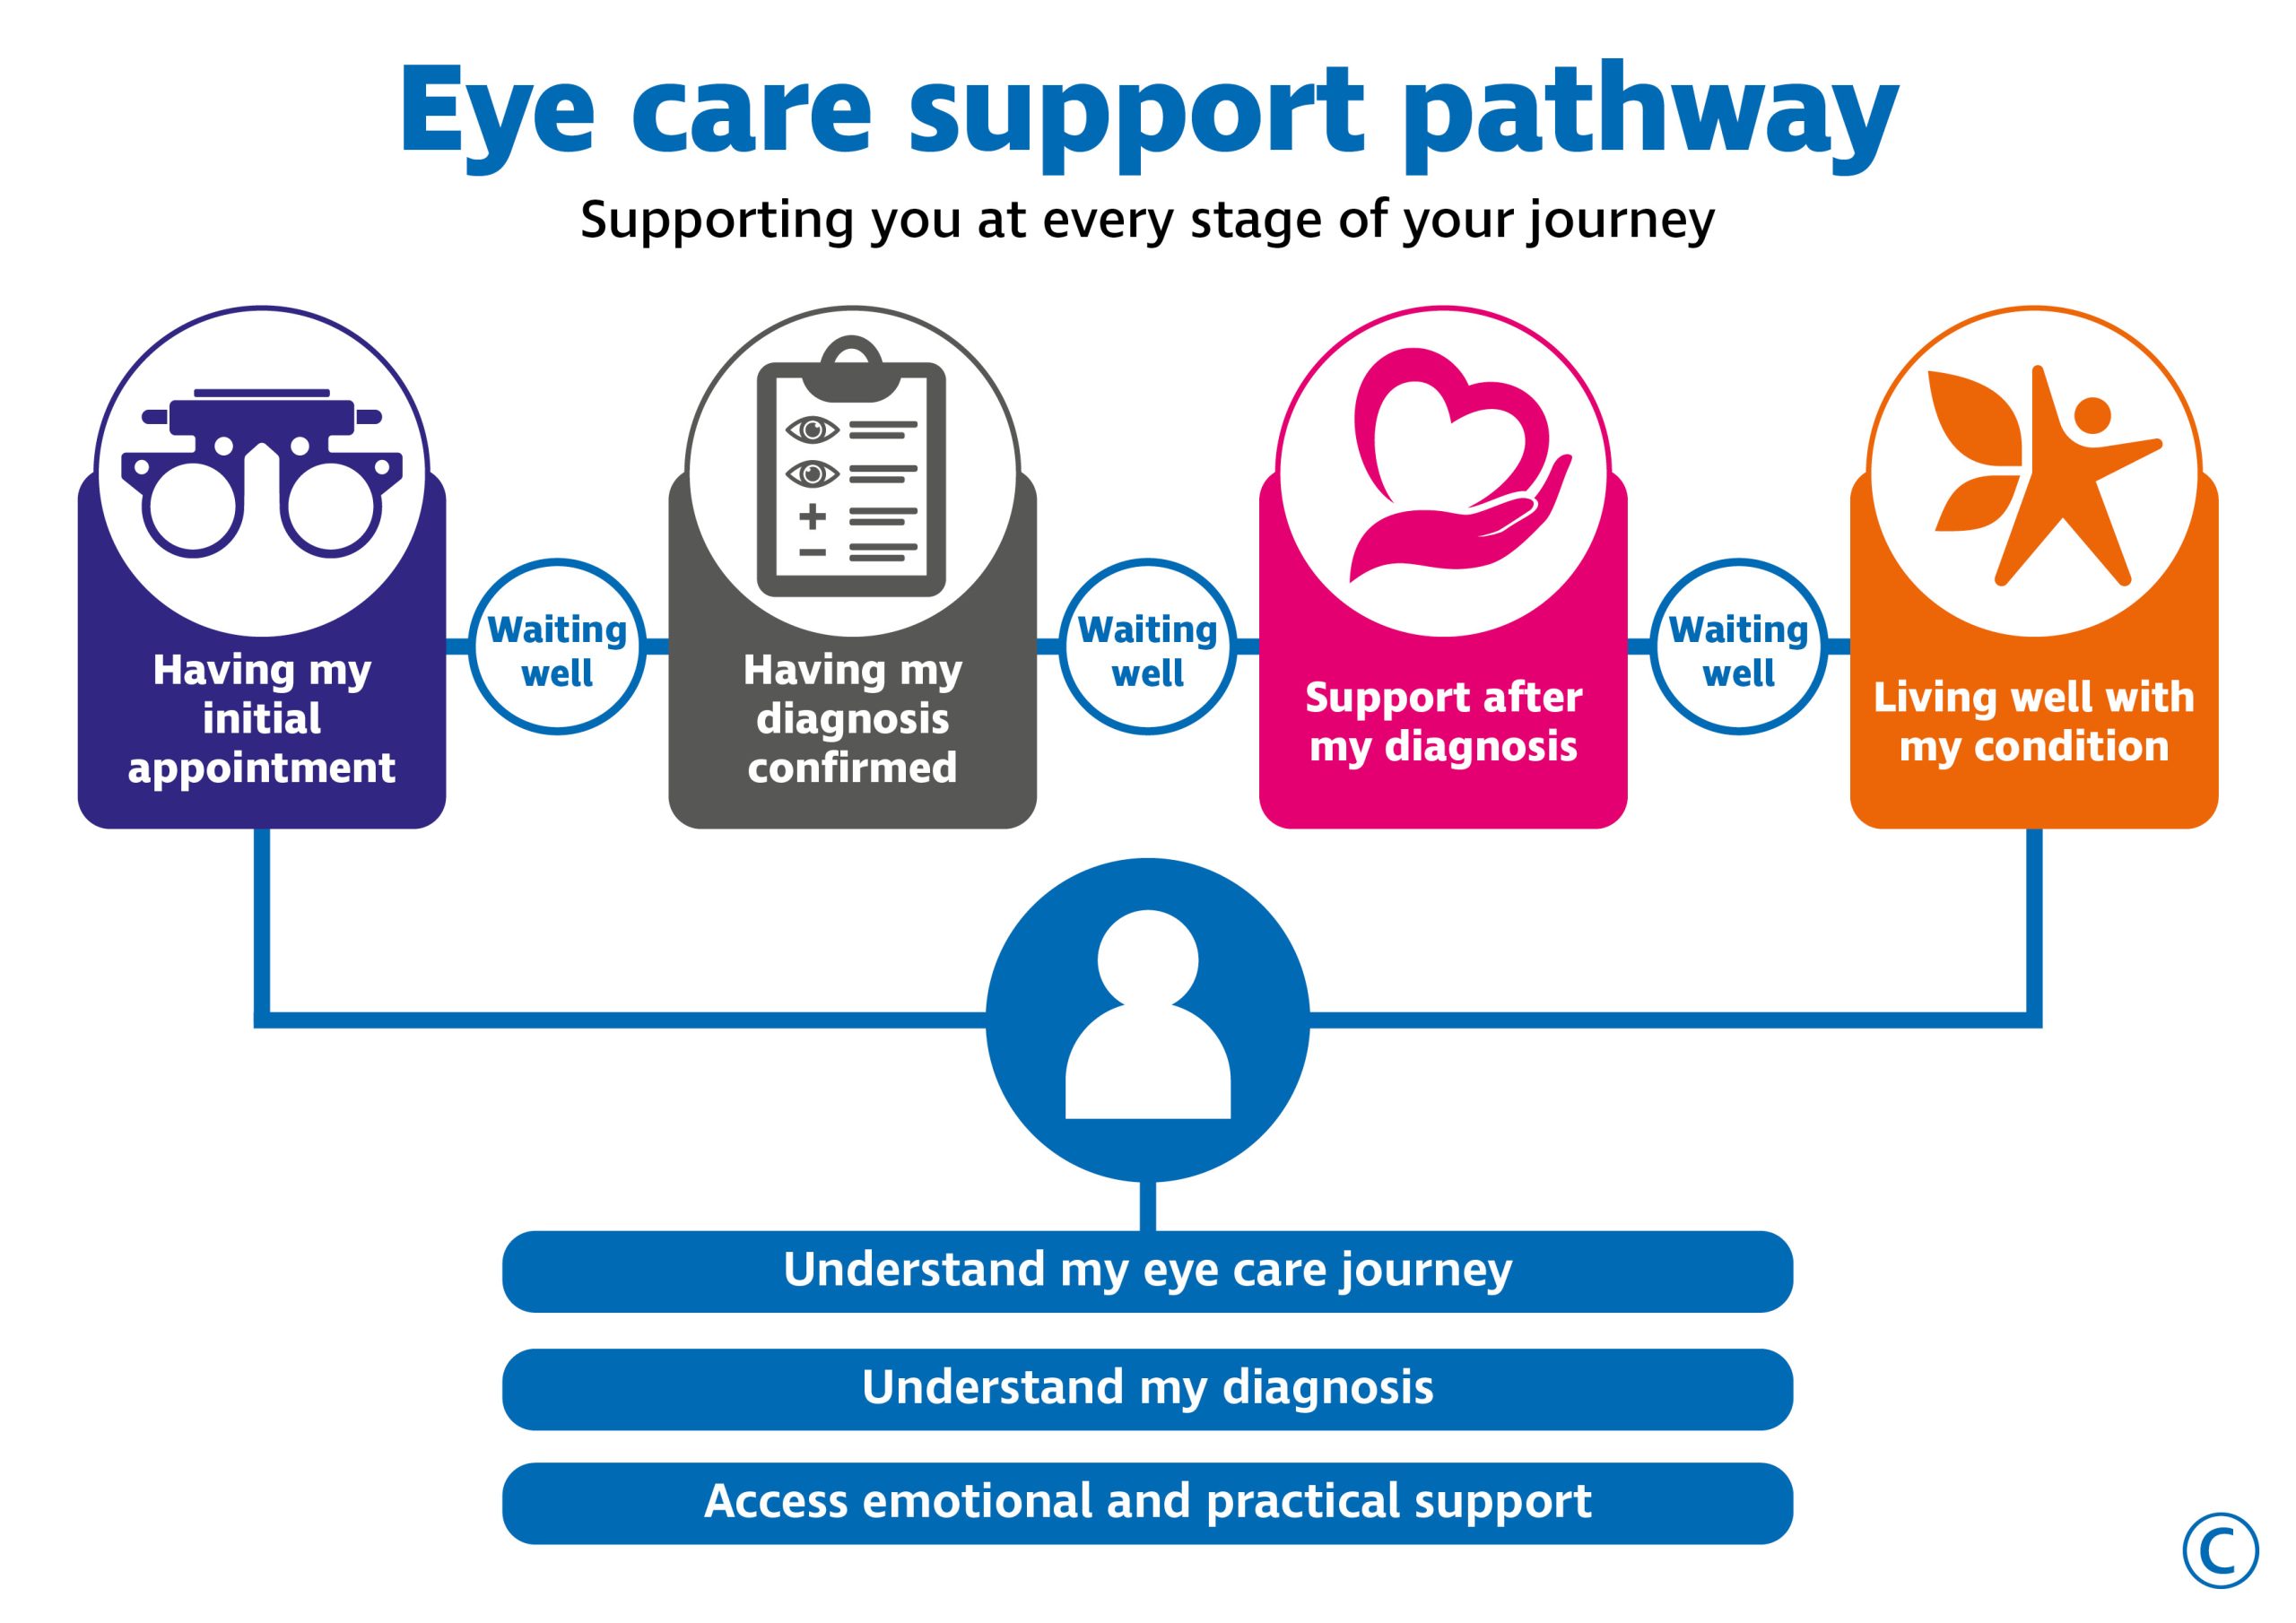 The text in graphic says: Eye care support pathway Supporting you at every stage of your journey Underneath a graphic shows the four stages of an individual’s journey with the following text: 1. Having my initial appointment 2. Waiting well 3. Having my diagnosis confirmed 4. Waiting well 5. Support after my diagnosis 6. Waiting well 7. Living well with my condition Underneath this graphic it outlines what an individual can expect on their journey. Understand my eye care journey Understand my diagnosis Access emotional and practical support